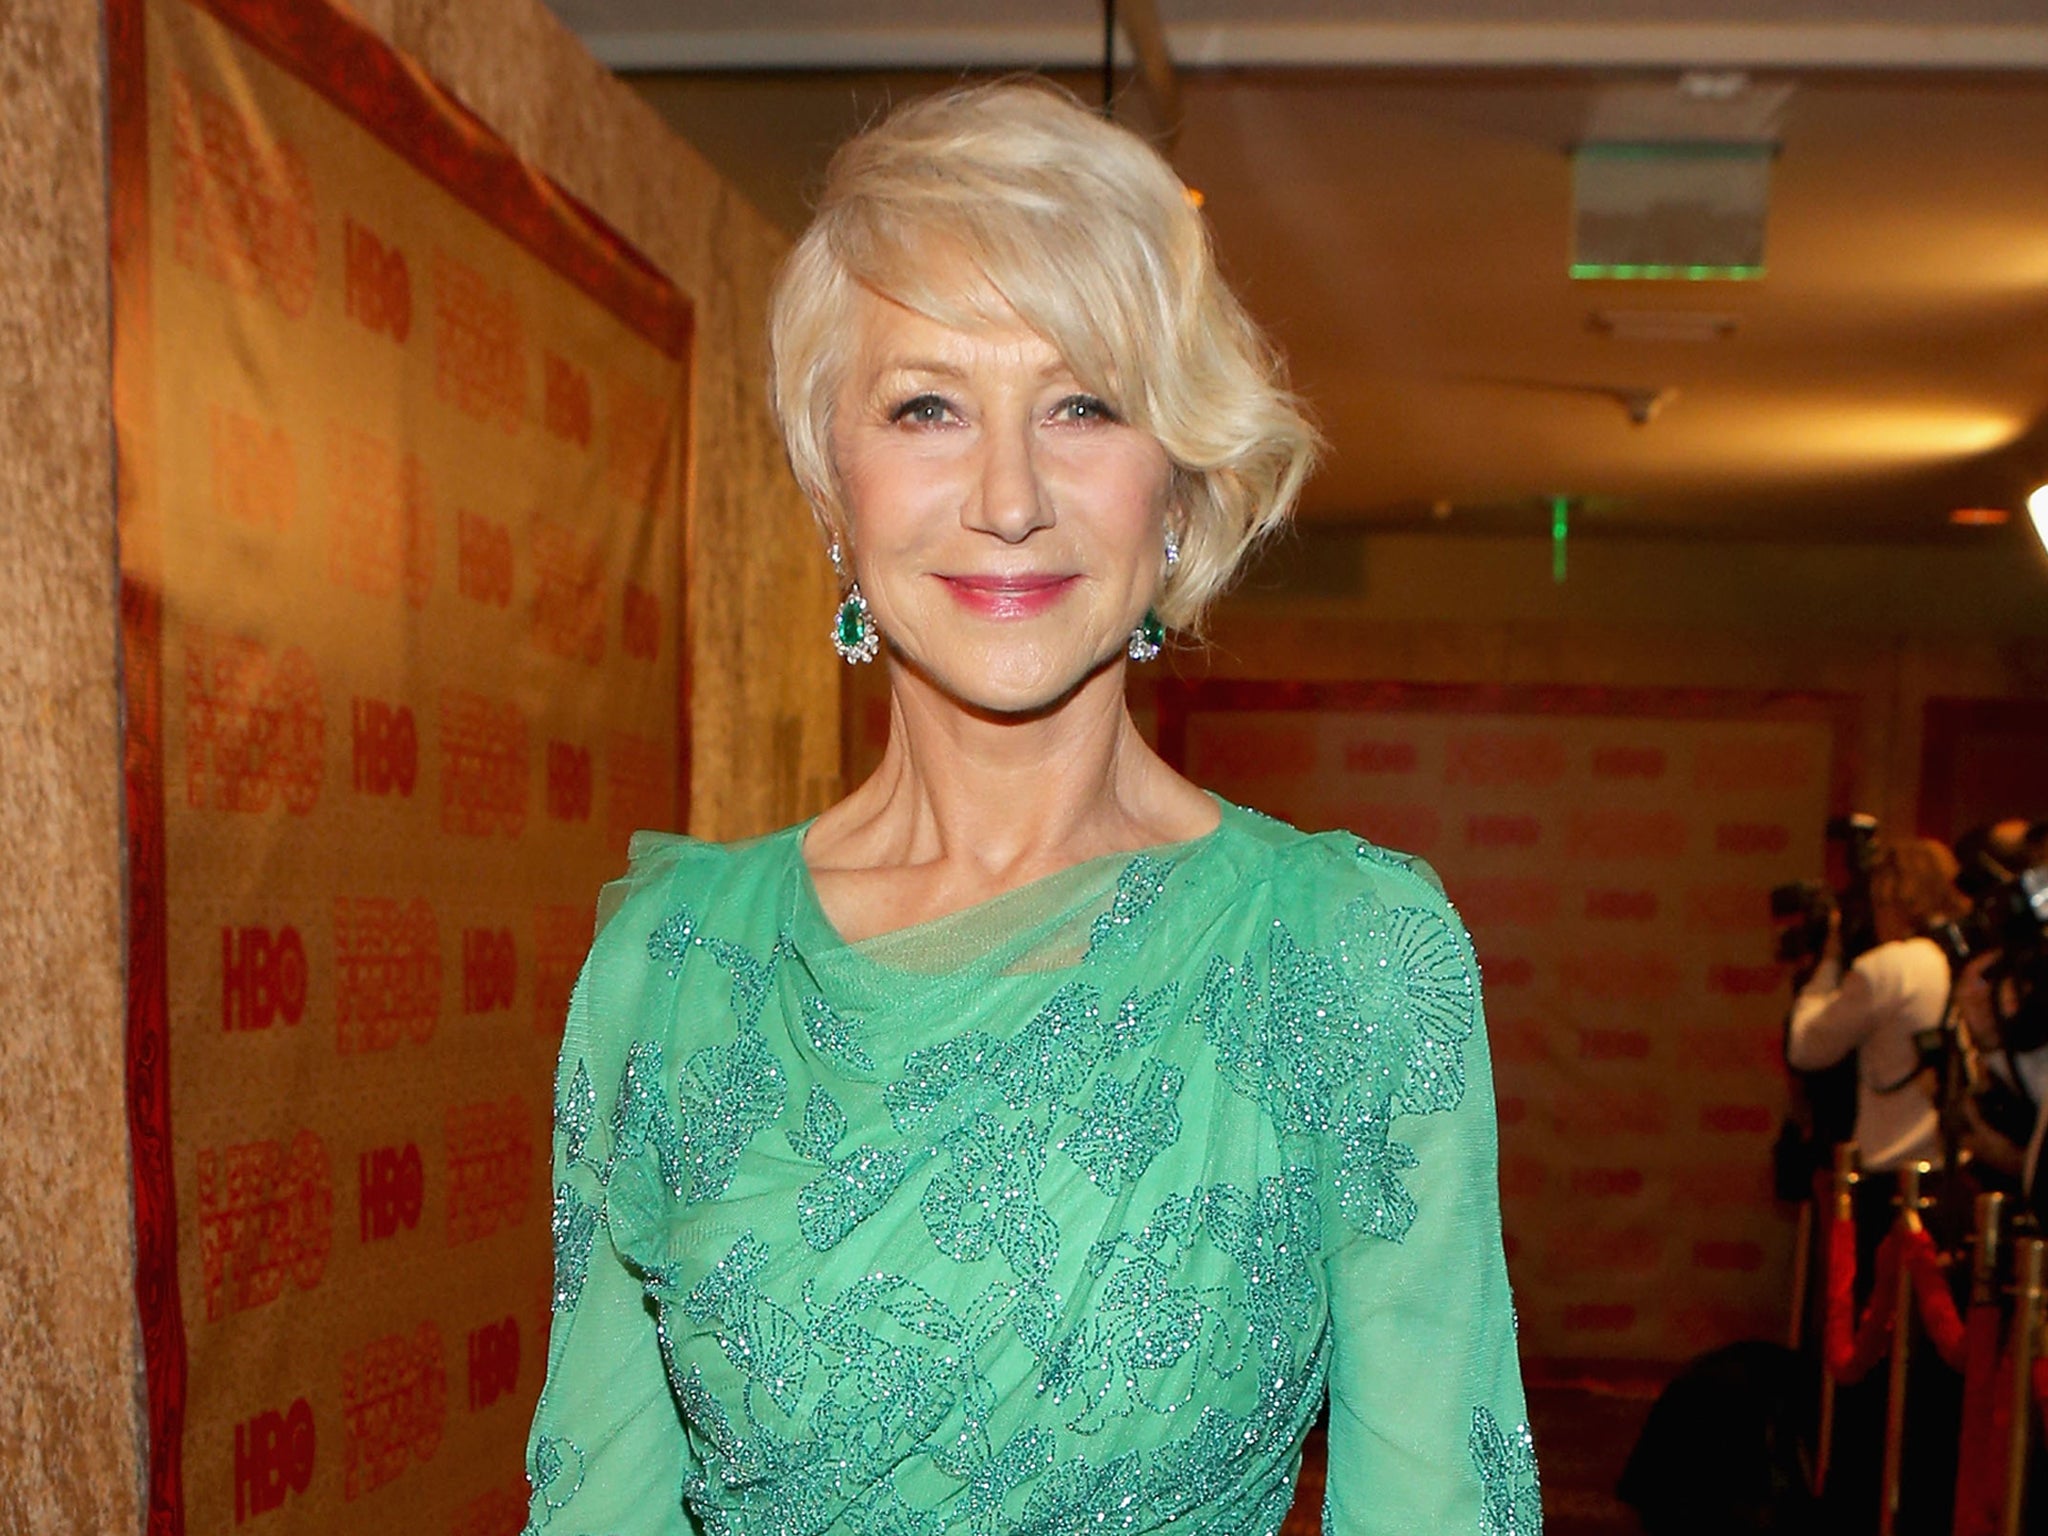 Helen Mirren enjoys the odd spanking session every now and then, apparently